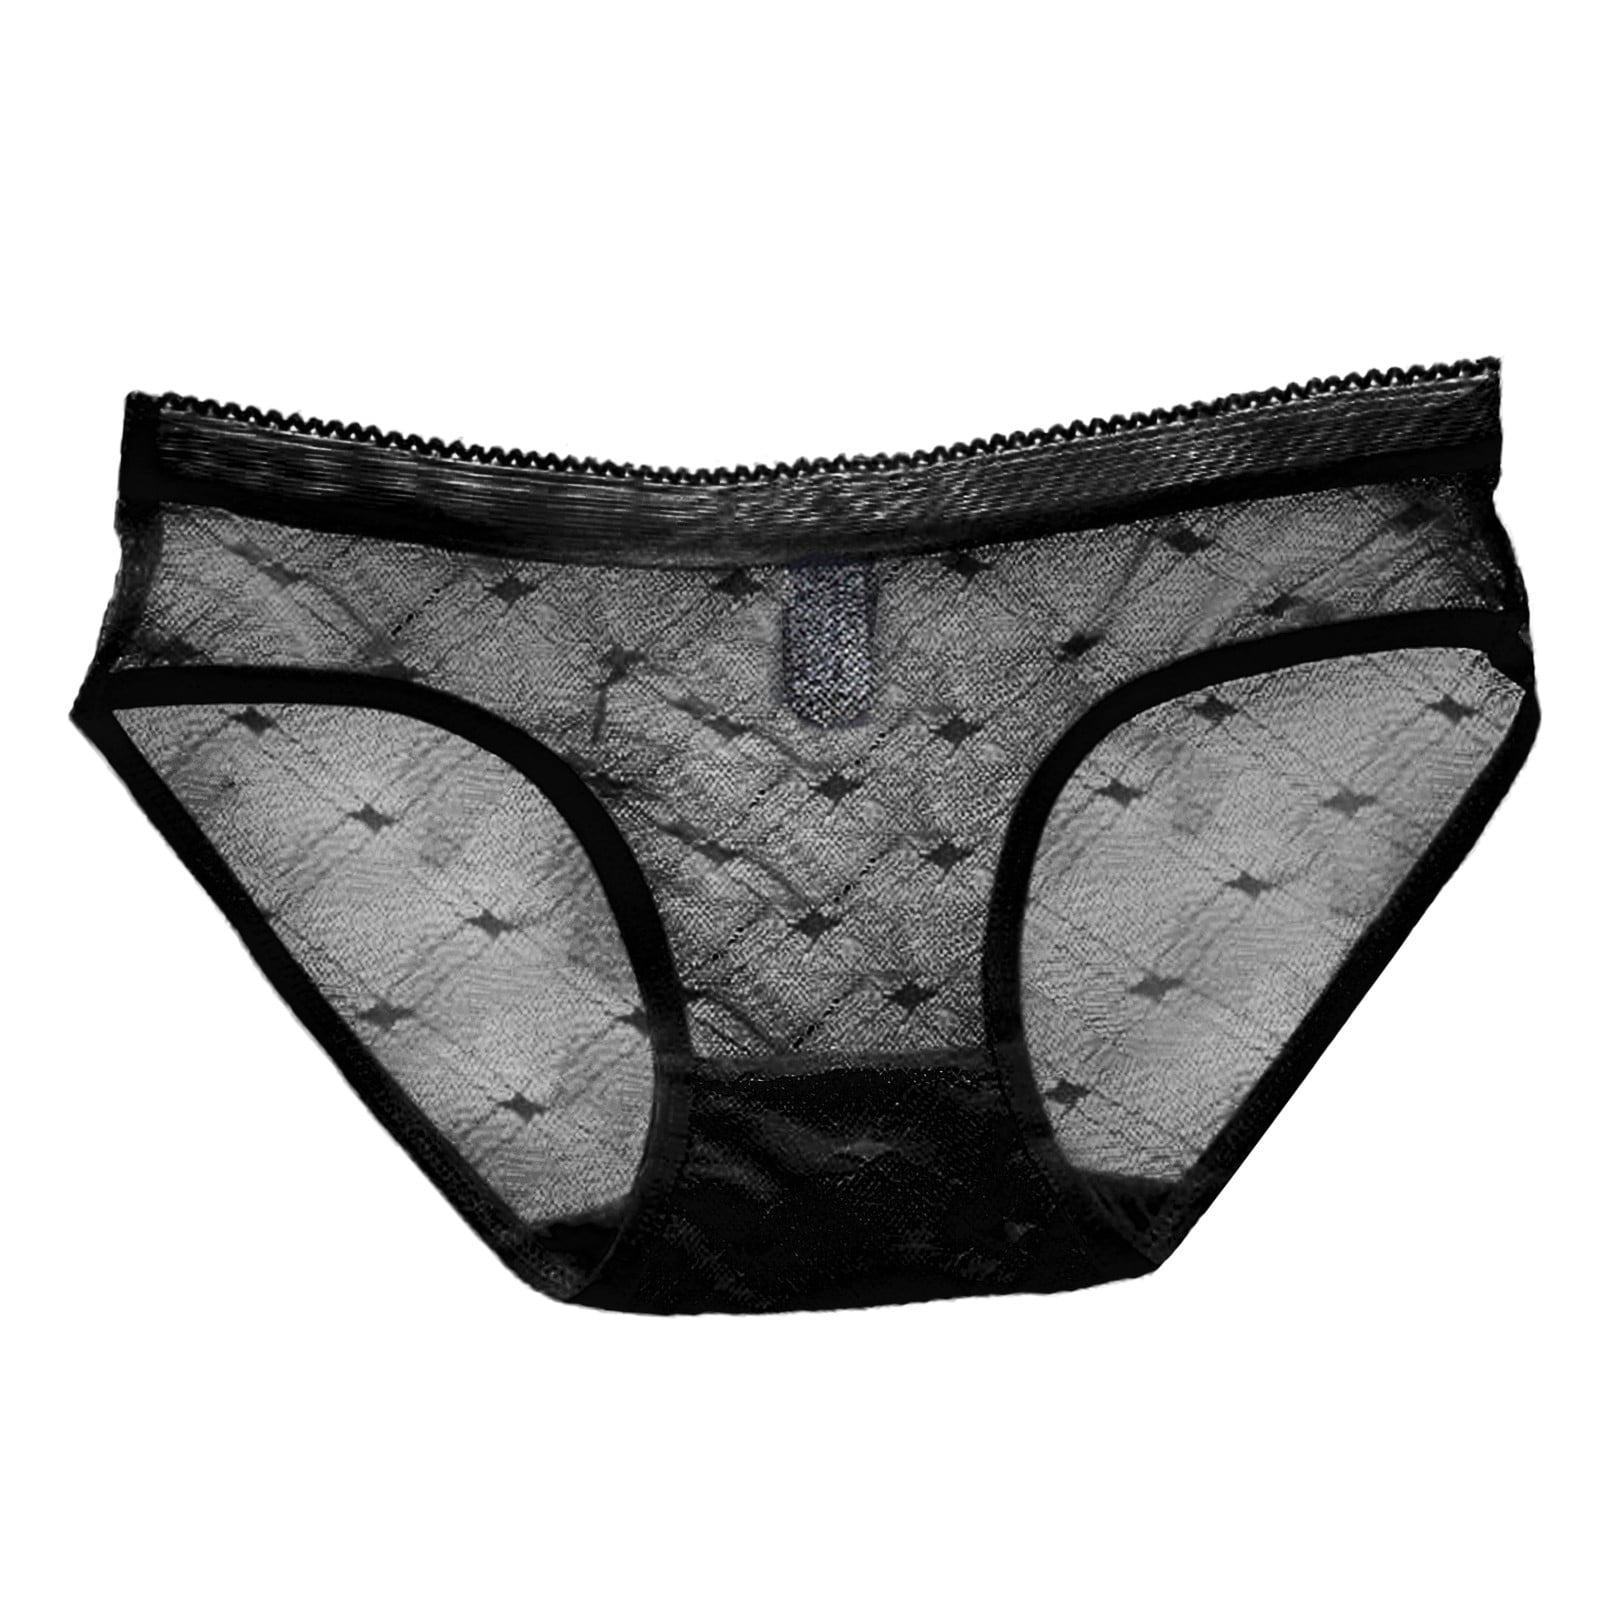 3 Pack Womens Underwear Sheer Lace See Through Mesh Cotton Crotch Seamless  Briefs Panties for Women 